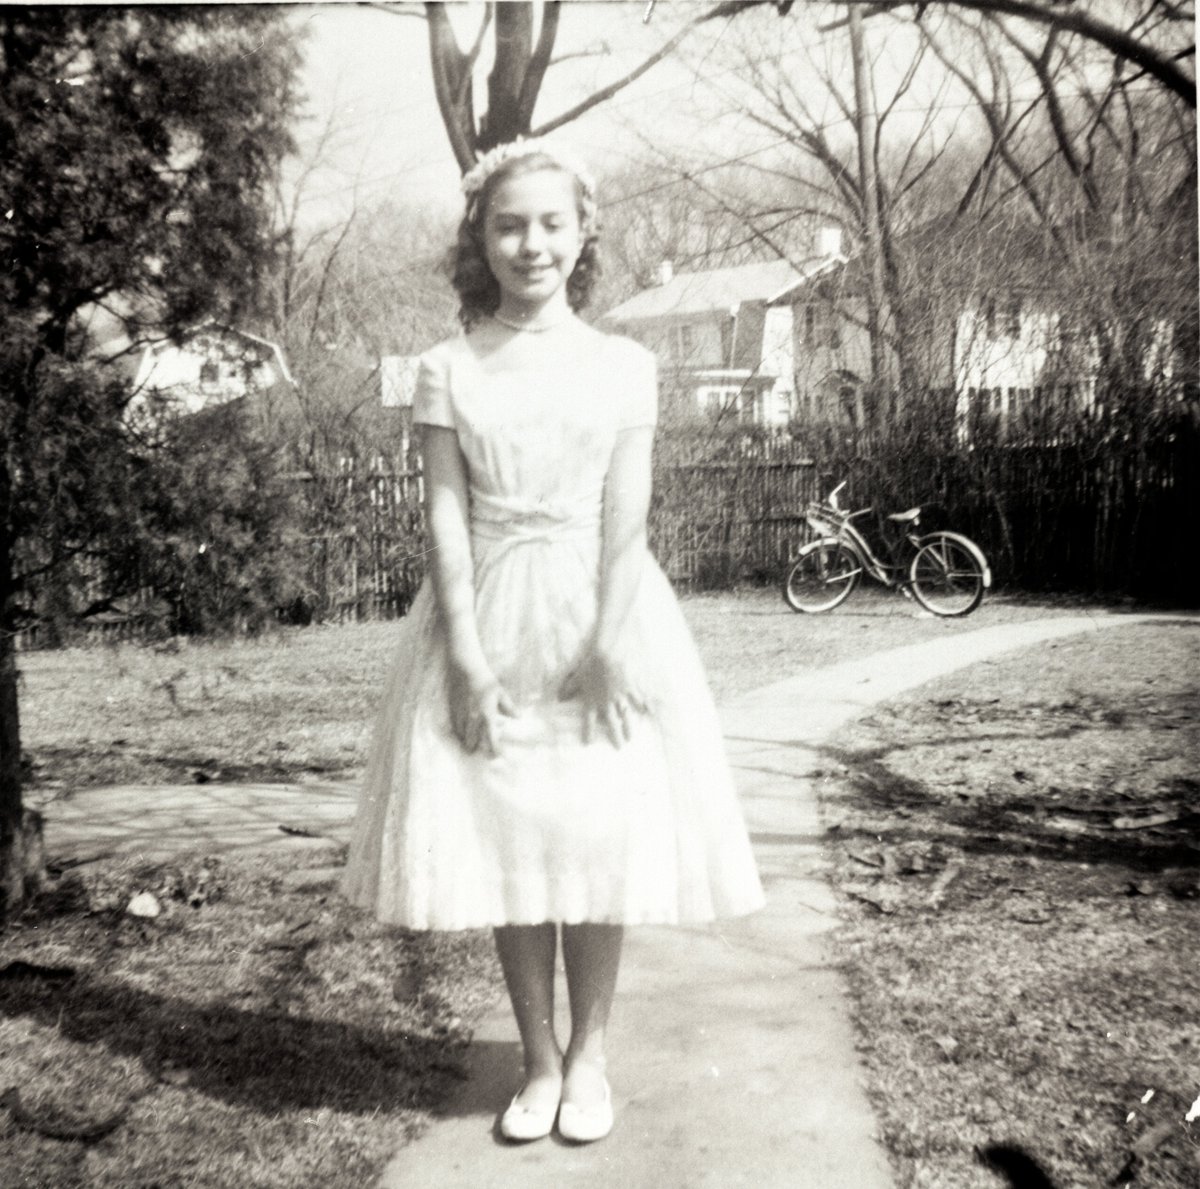 As a young girl, First Lady Hillary Rodham Clinton excelled in school, loved sports, was active in her church youth group, and even a member of the Girl Scouts. This photo captures a moment of young Hillary in her backyard in Park Ridge Illinois in 1960. #MoreThanFirstLadies